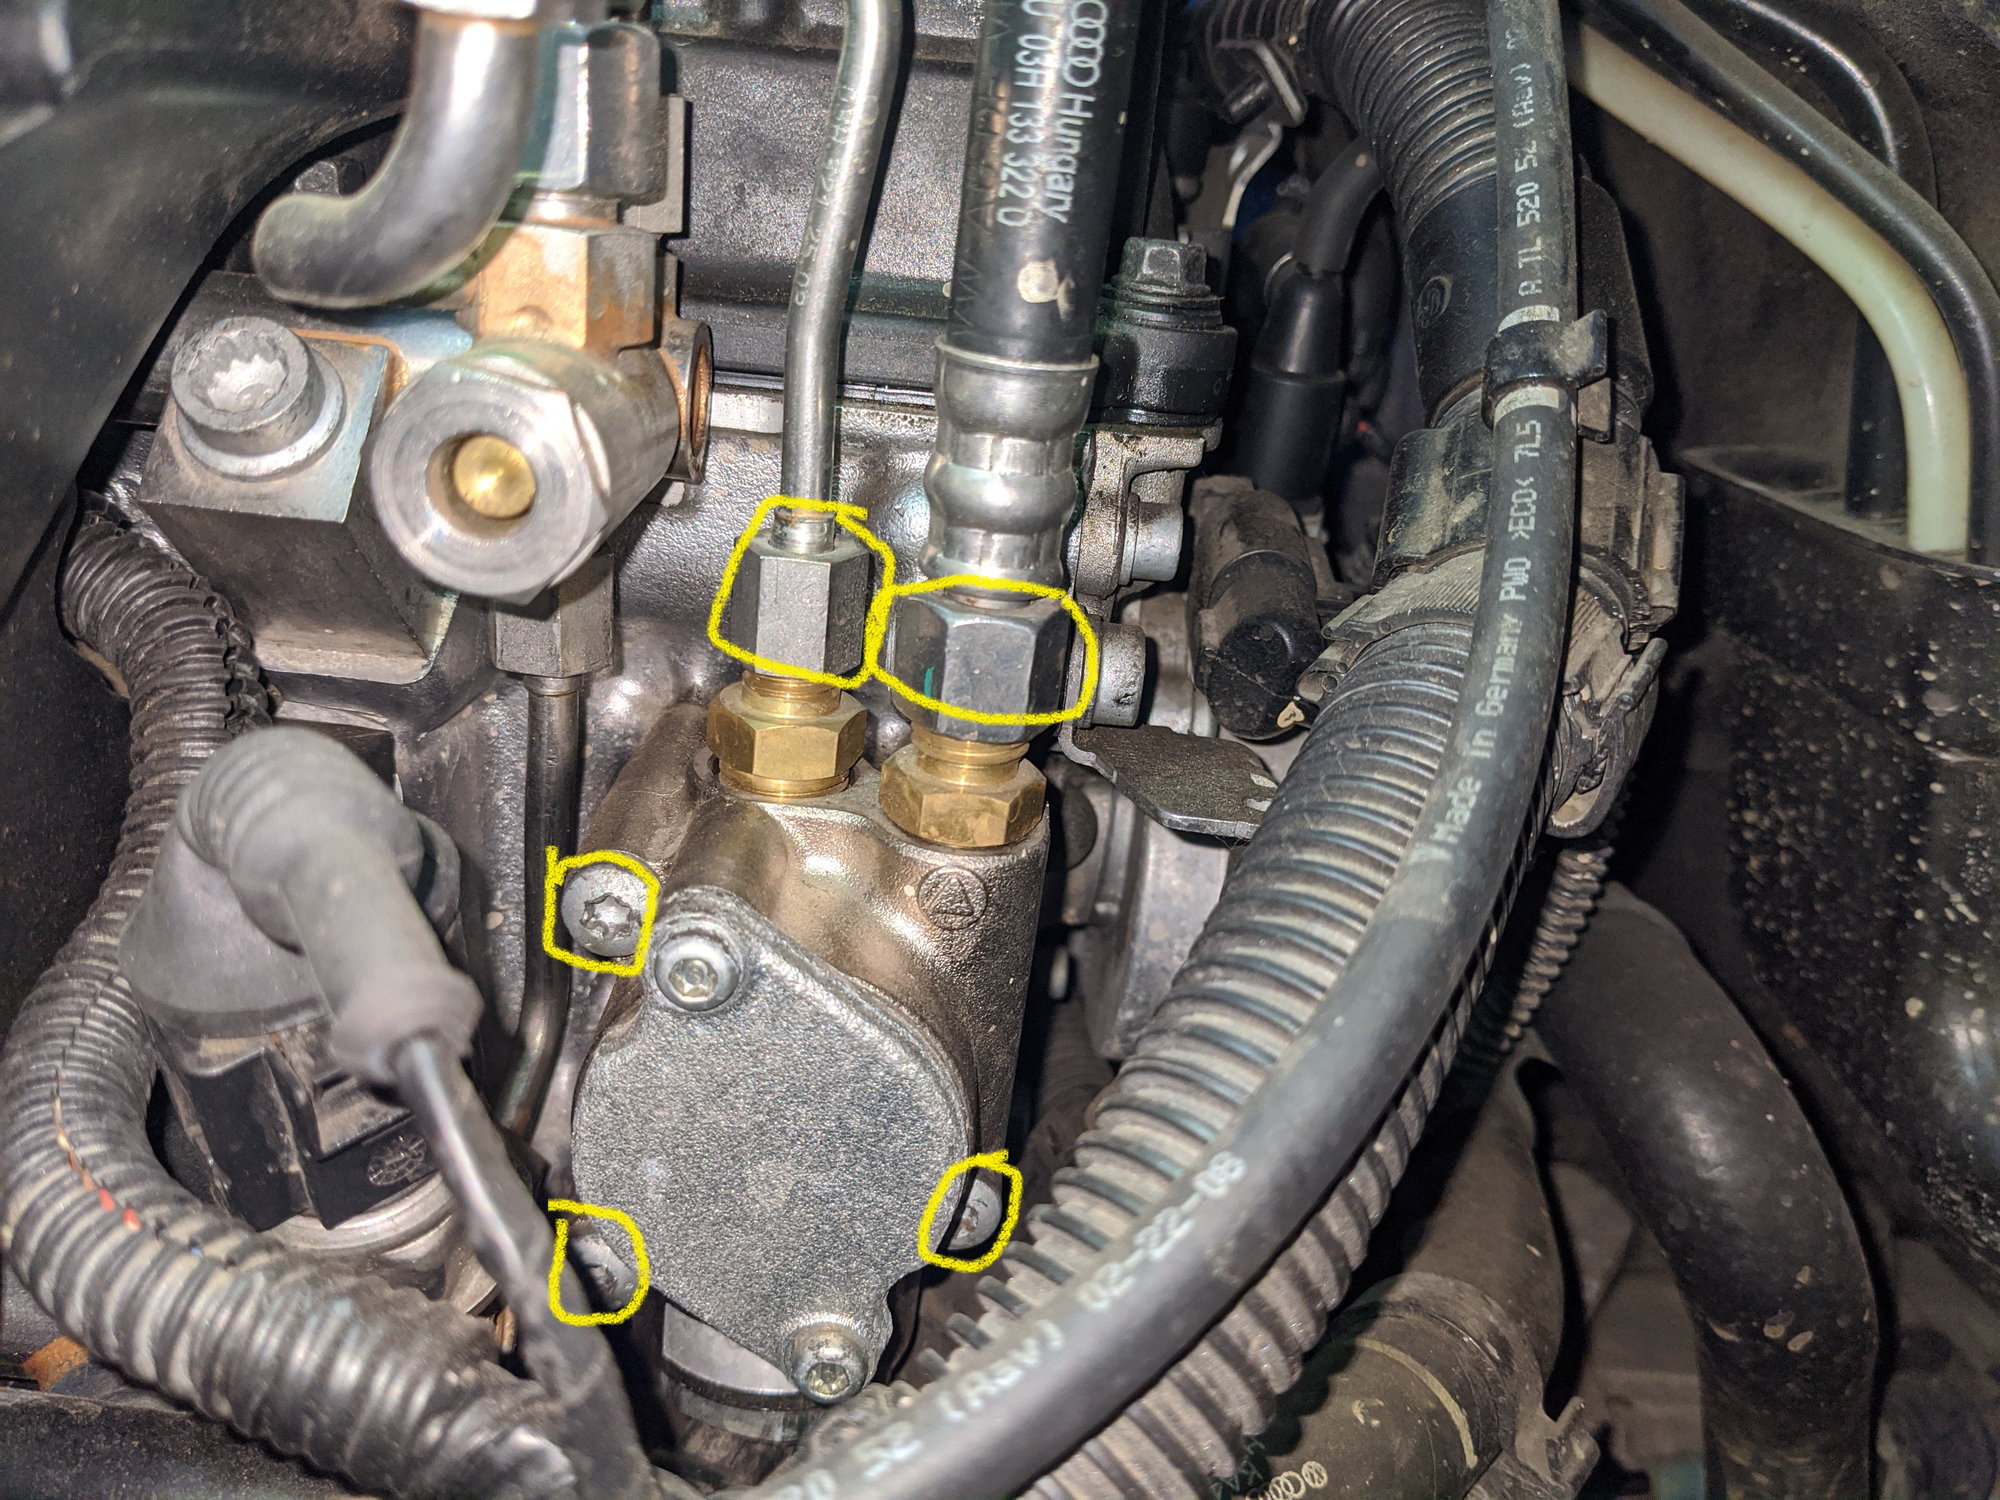 Curious Vr6 Fuel Issue Could Use Help Trouble Shooting Rennlist Porsche Discussion Forums